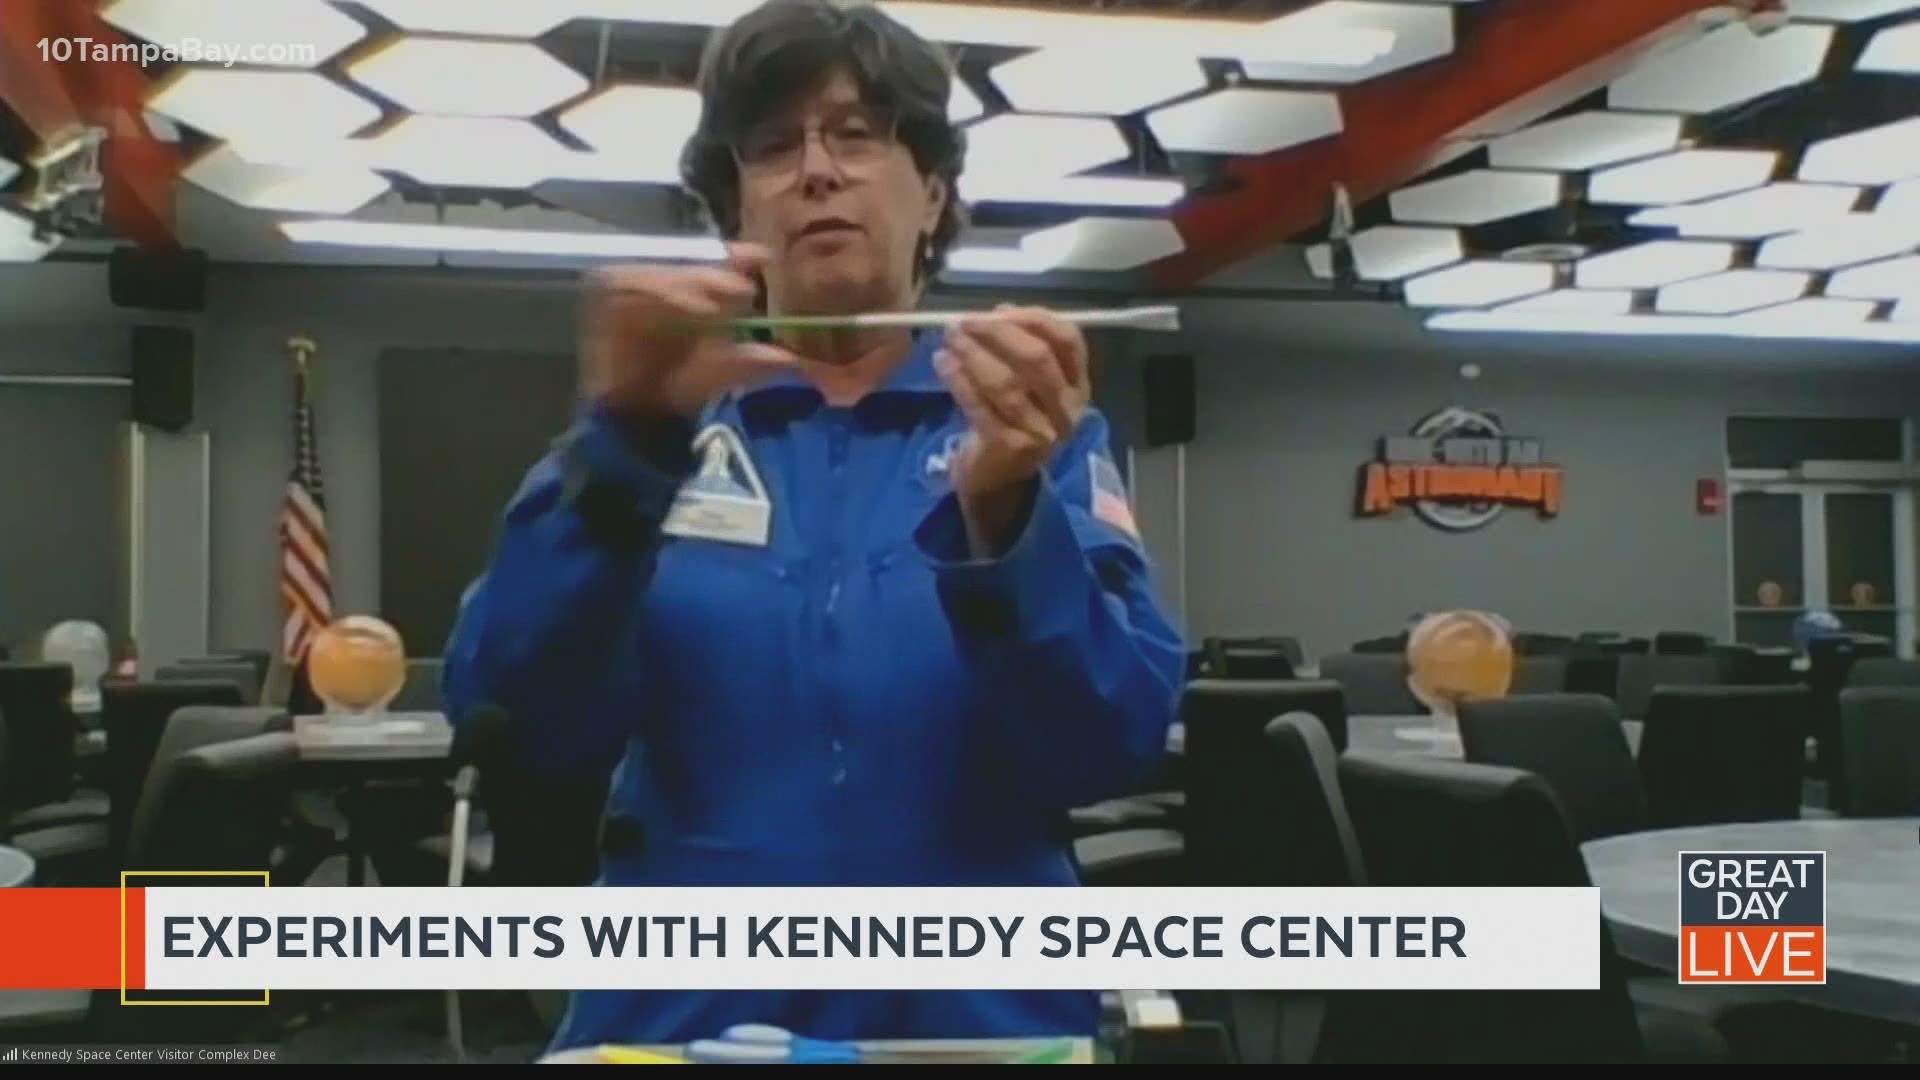 An experiment in aerodynamics with Kennedy Space Center